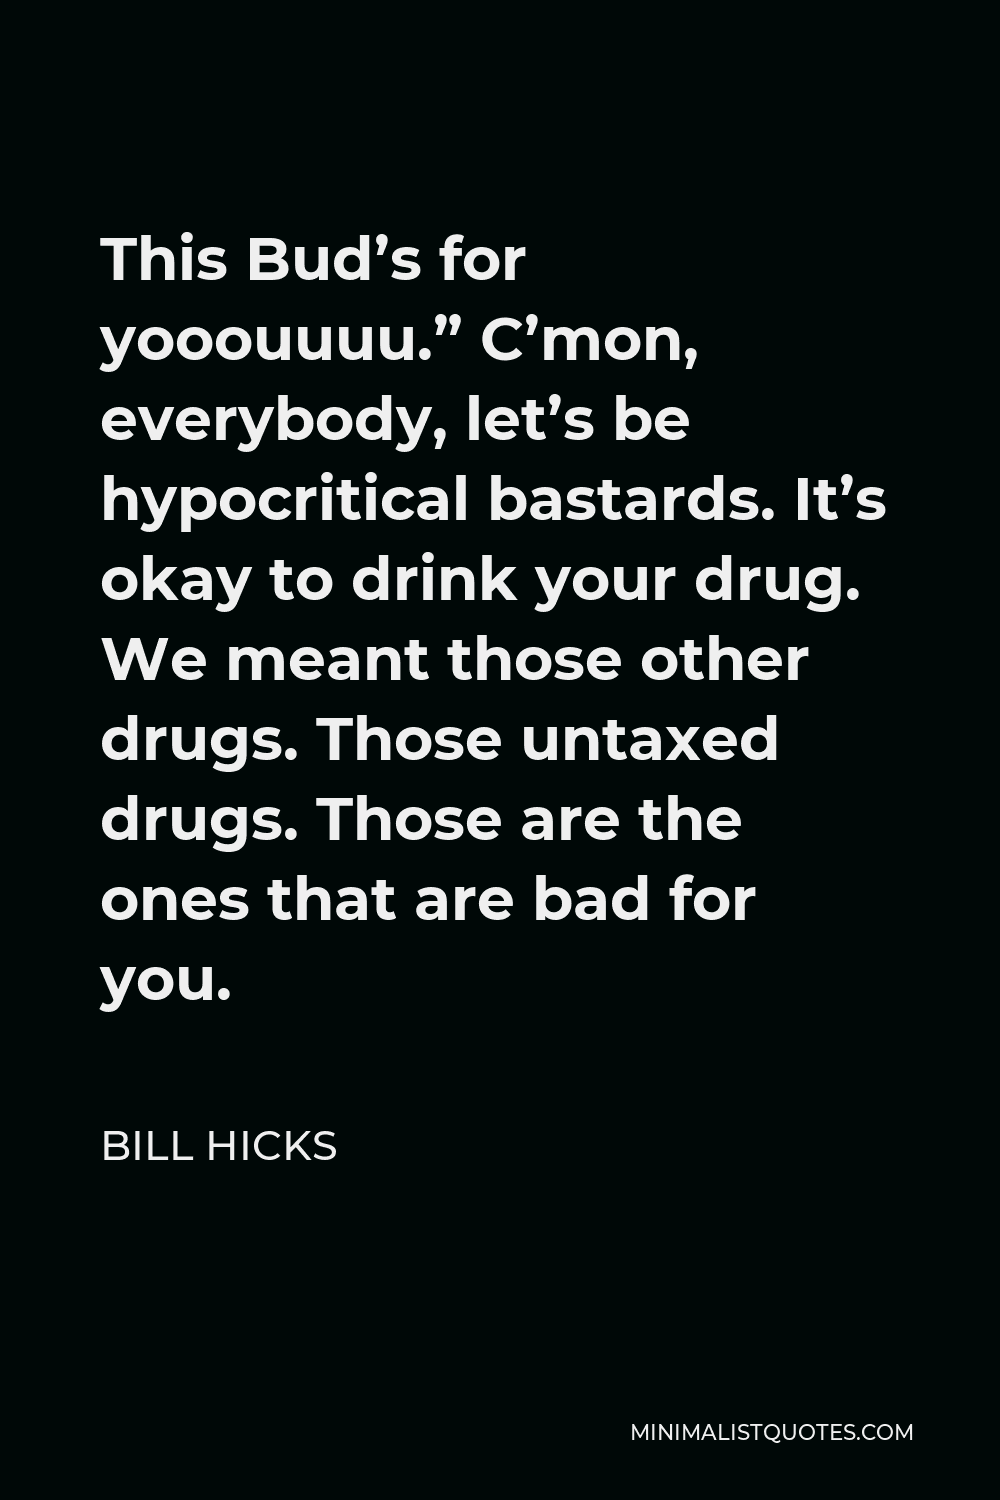 Bill Hicks Quote - This Bud’s for yooouuuu.” C’mon, everybody, let’s be hypocritical bastards. It’s okay to drink your drug. We meant those other drugs. Those untaxed drugs. Those are the ones that are bad for you.